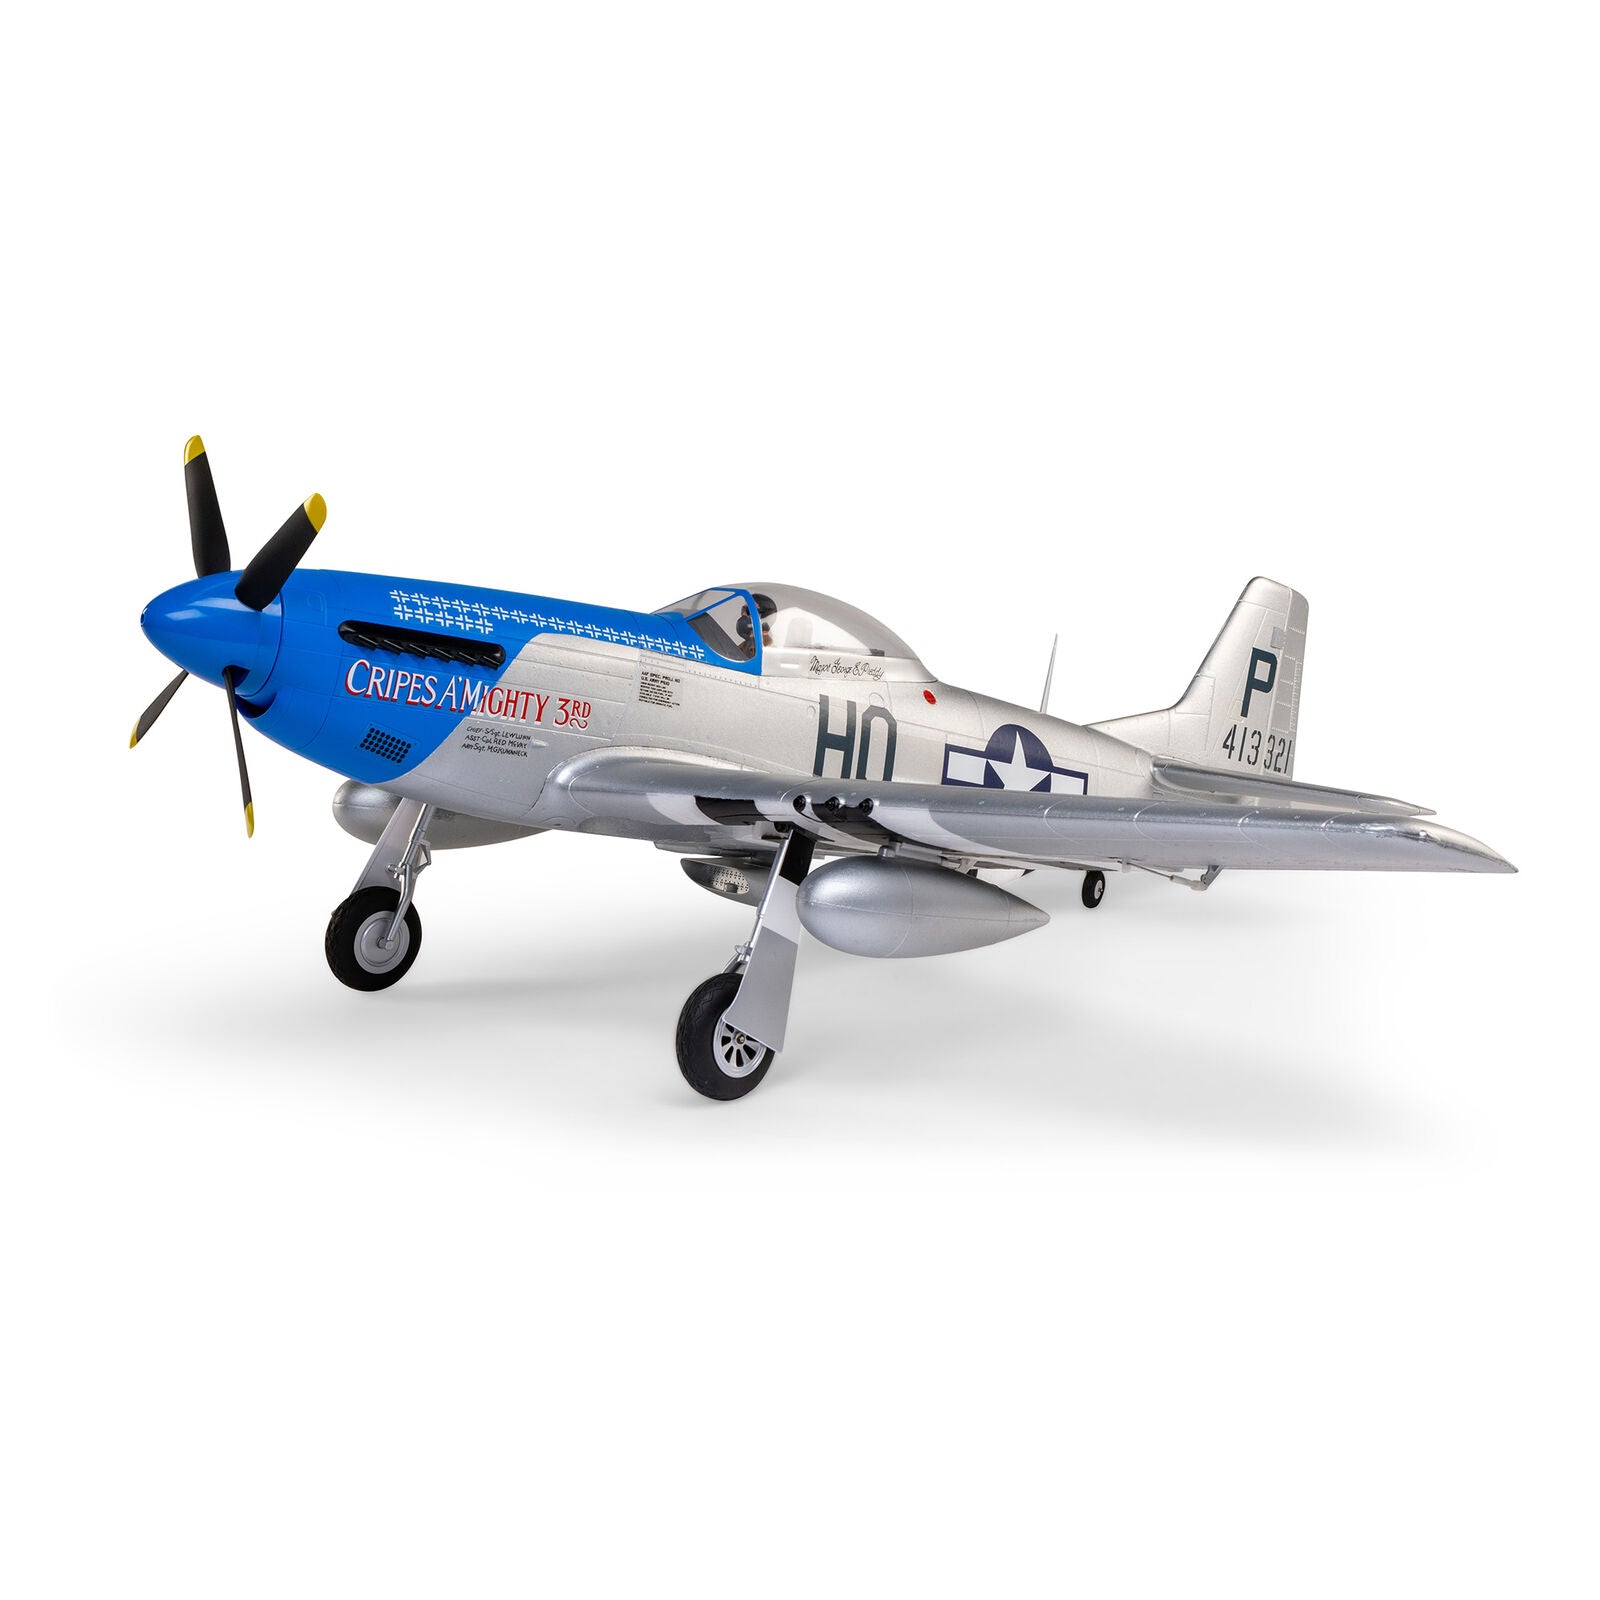 EFLITE EFL089500 P-51D Mustang 1.2m BNF Basic with AS3X and SAFE Select “Cripes A’Mighty 3rd”